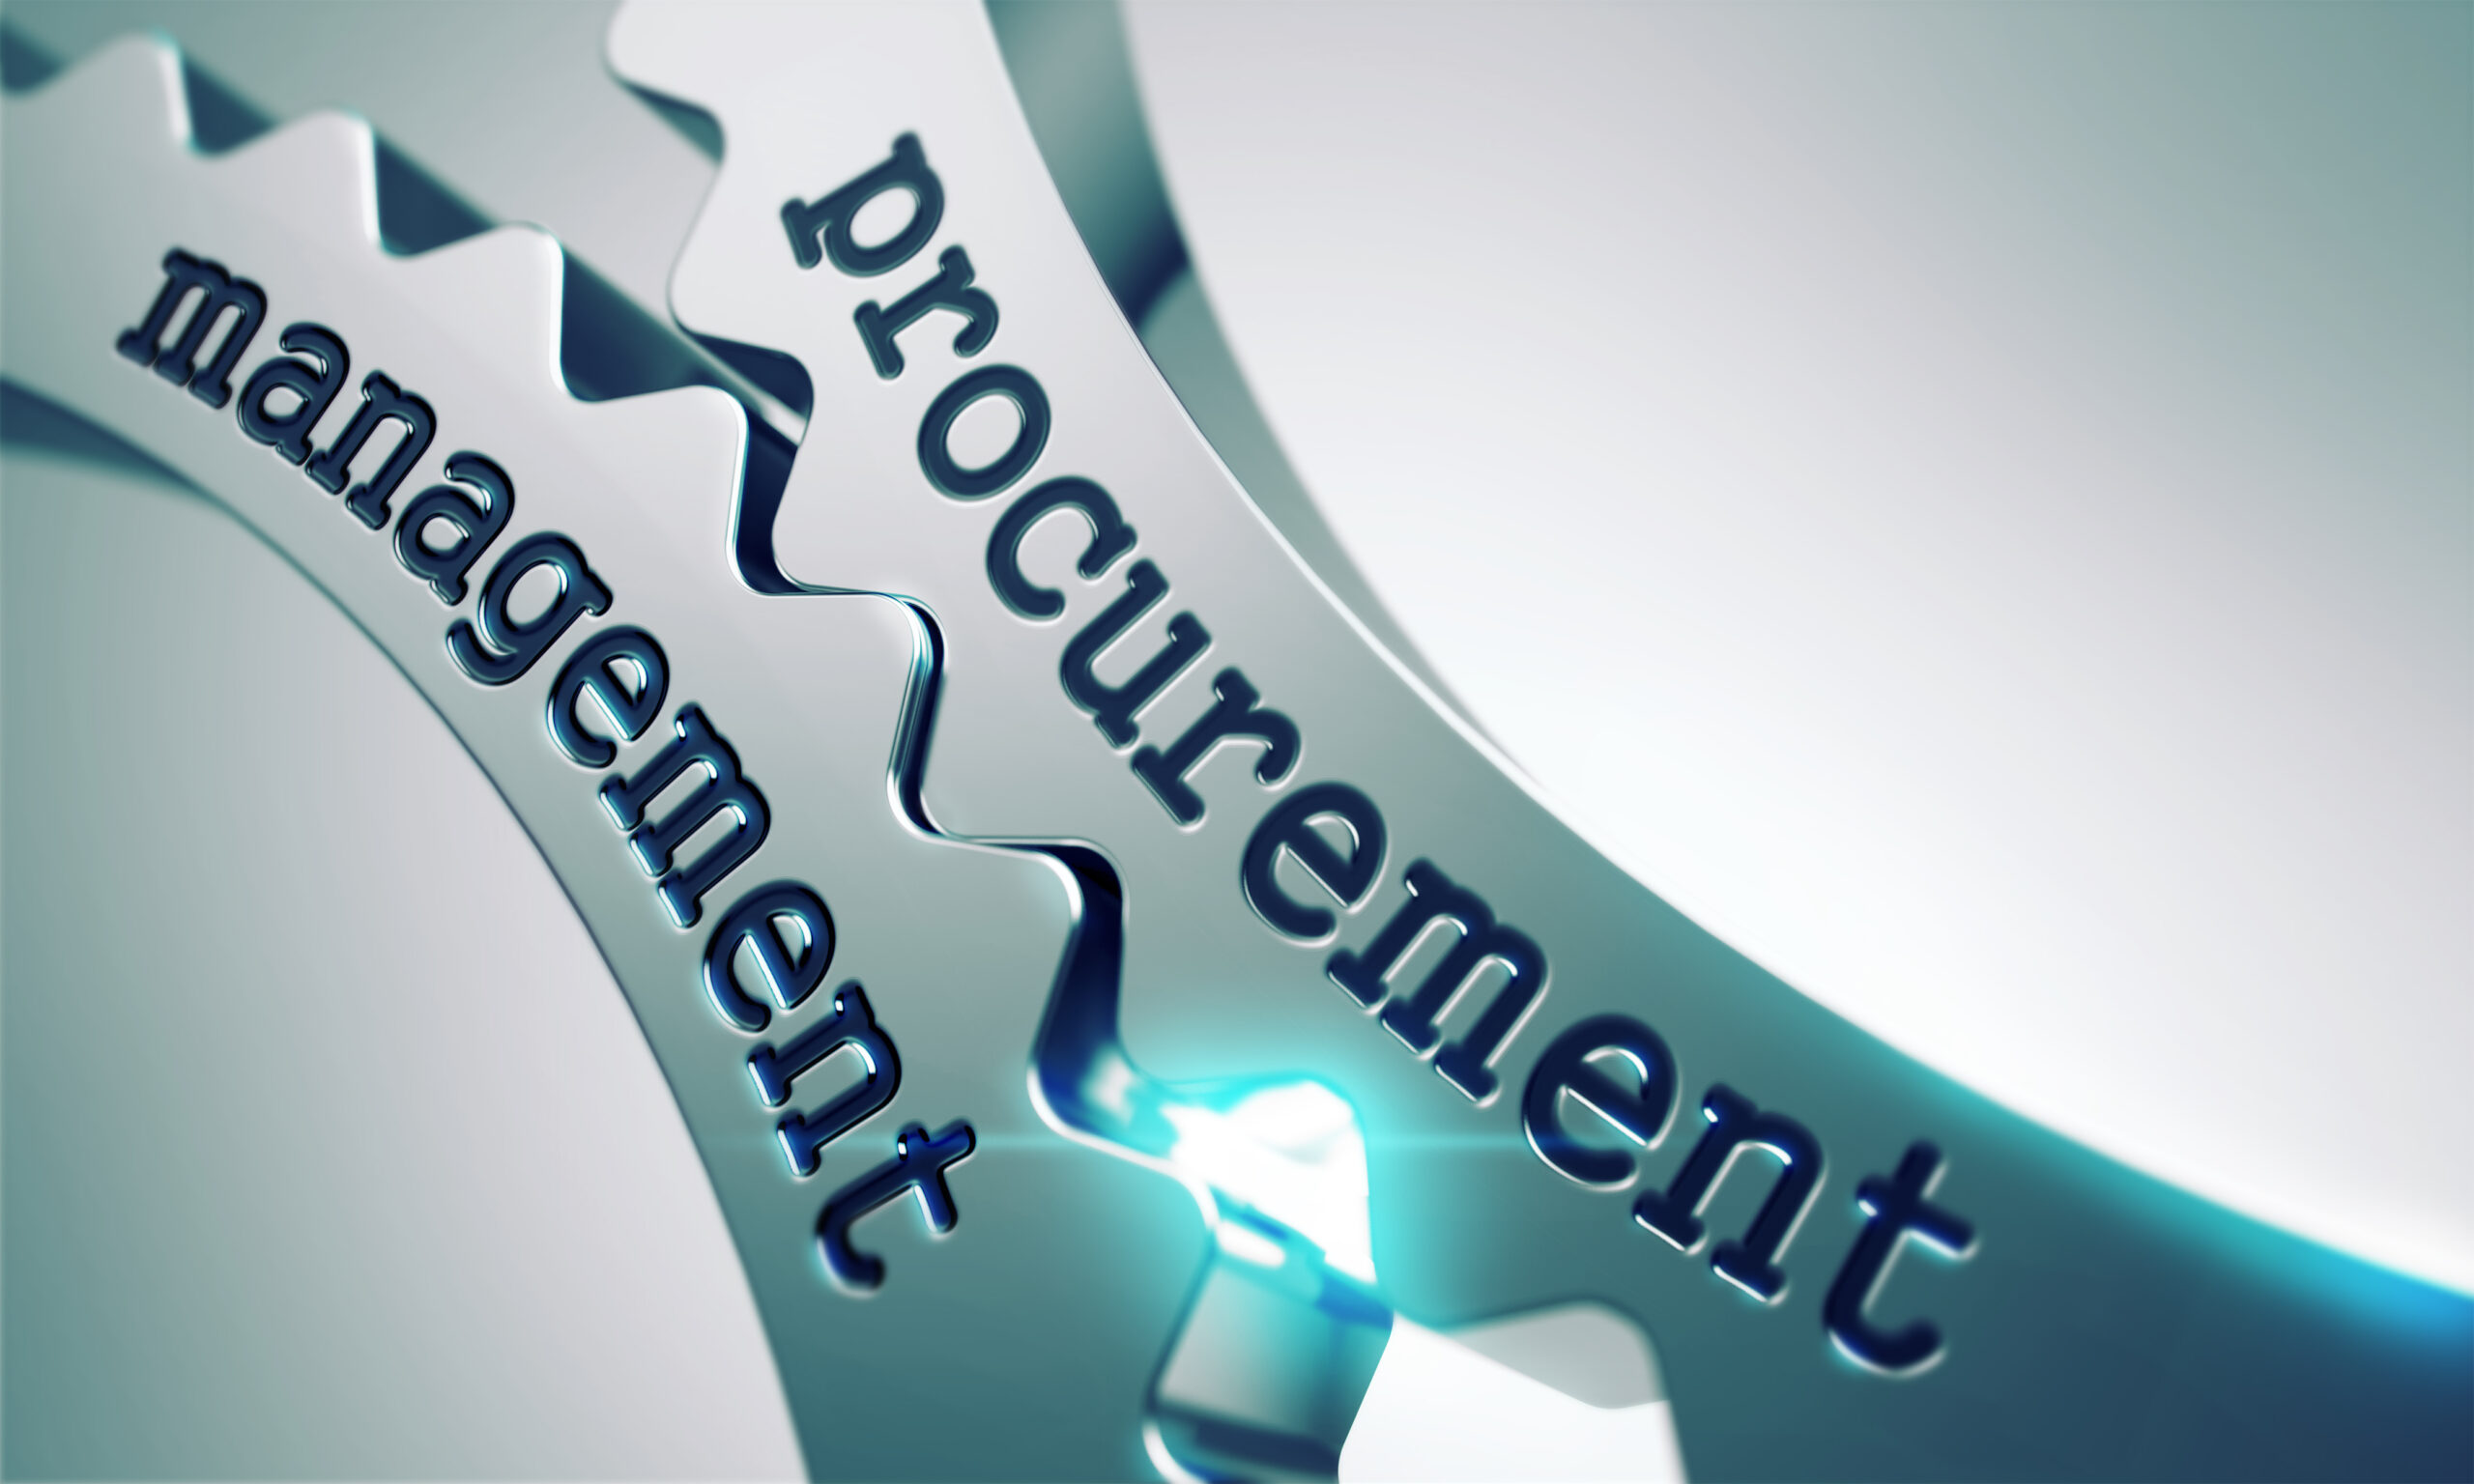 image with words procurement and management intersecting on gears